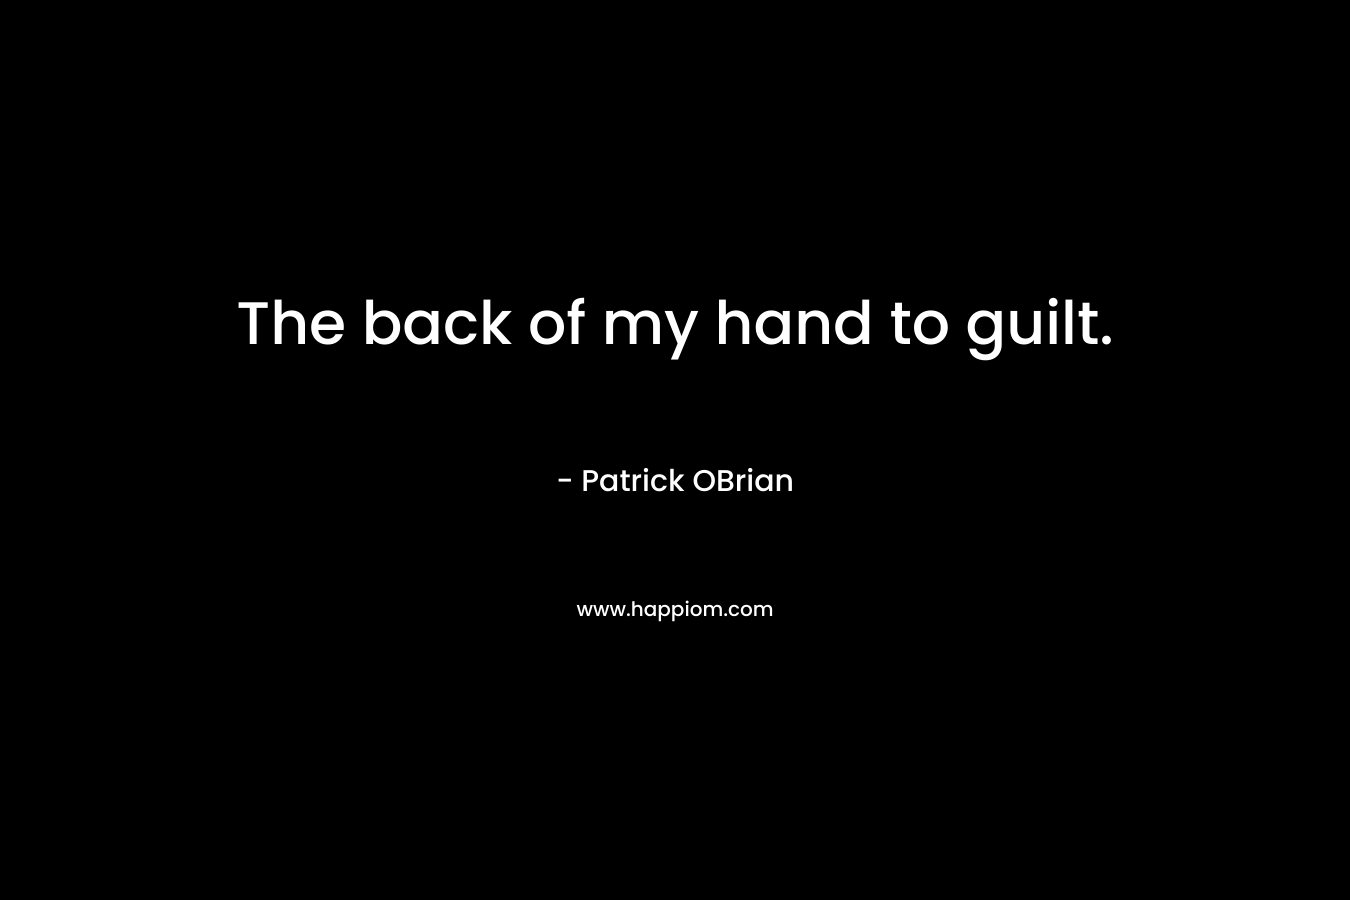 The back of my hand to guilt. – Patrick OBrian